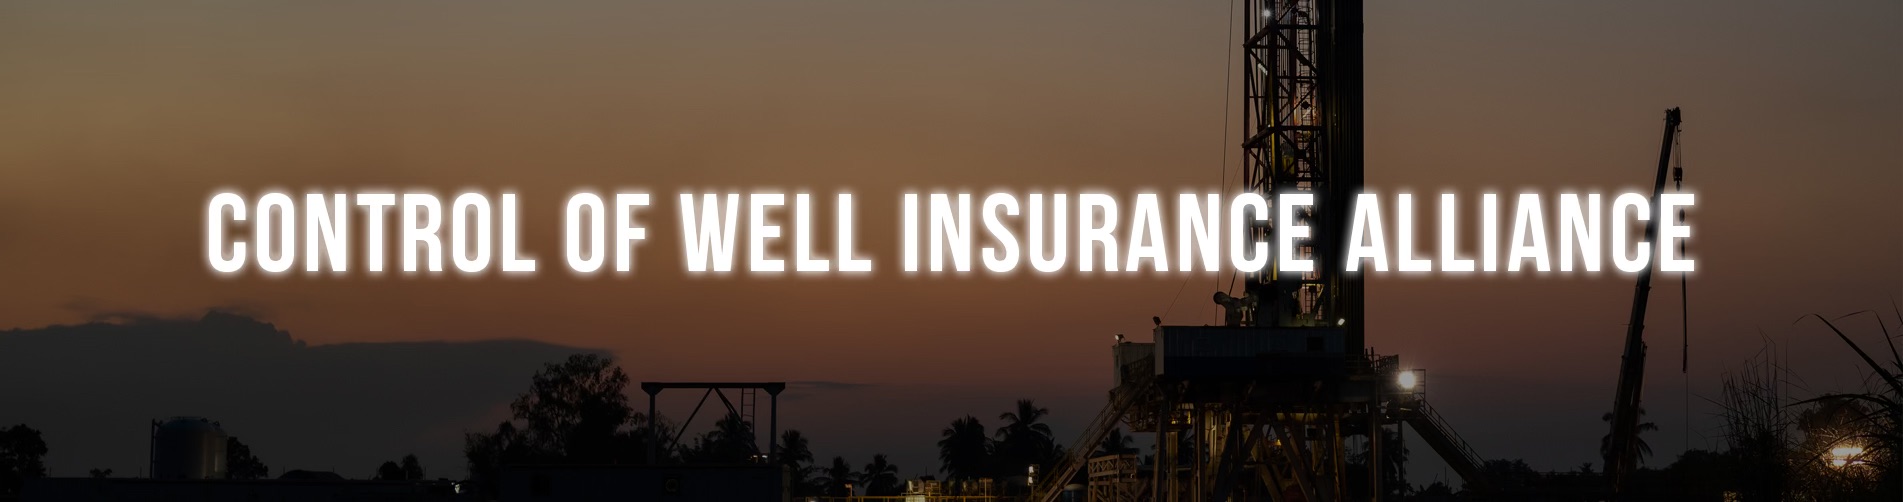 Control of Well Insurance Alliance